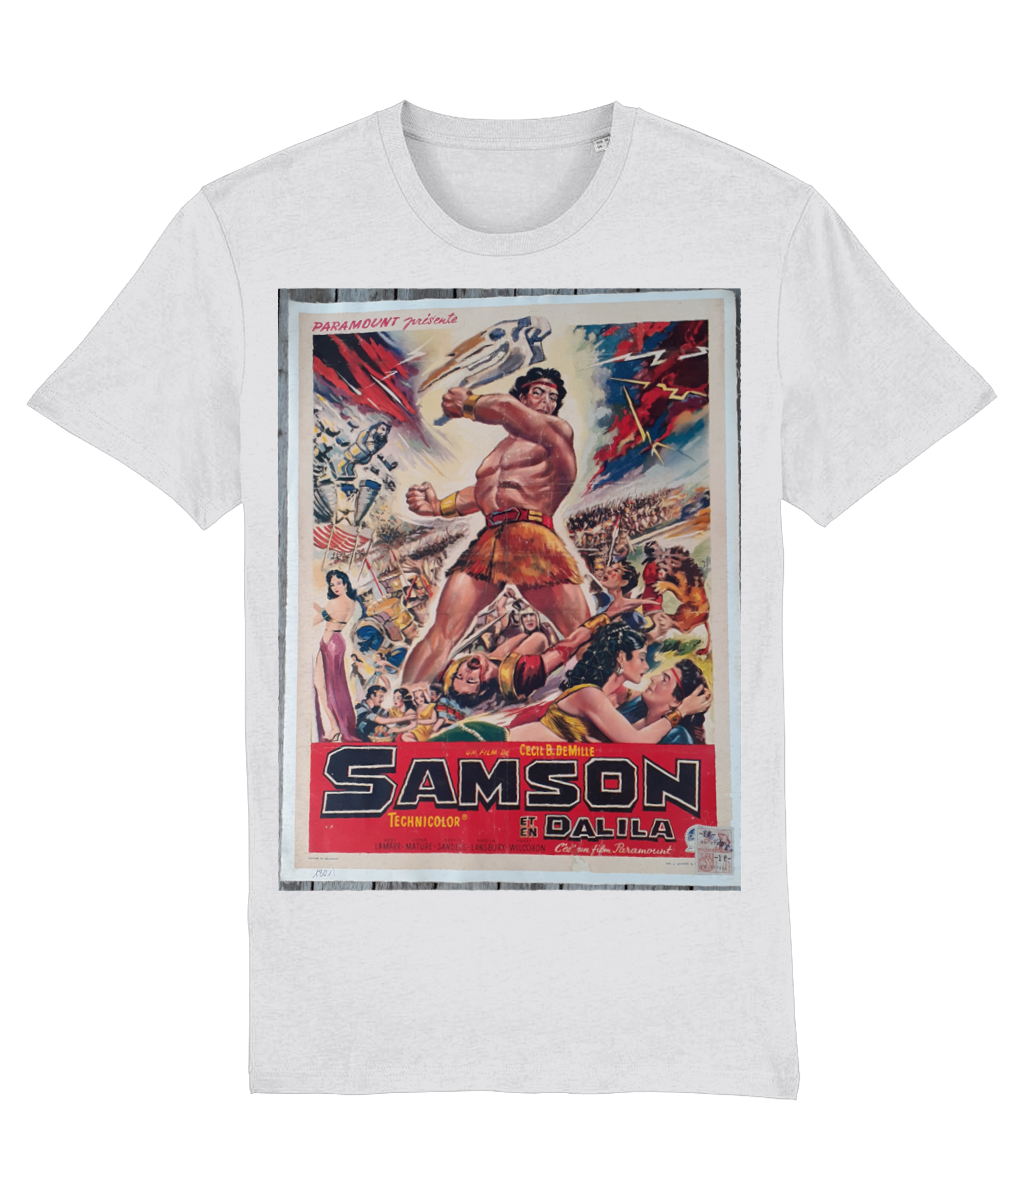 SALE of Sampson n Dalila-Classic Film Poster design-GAS T Shirts-FN03